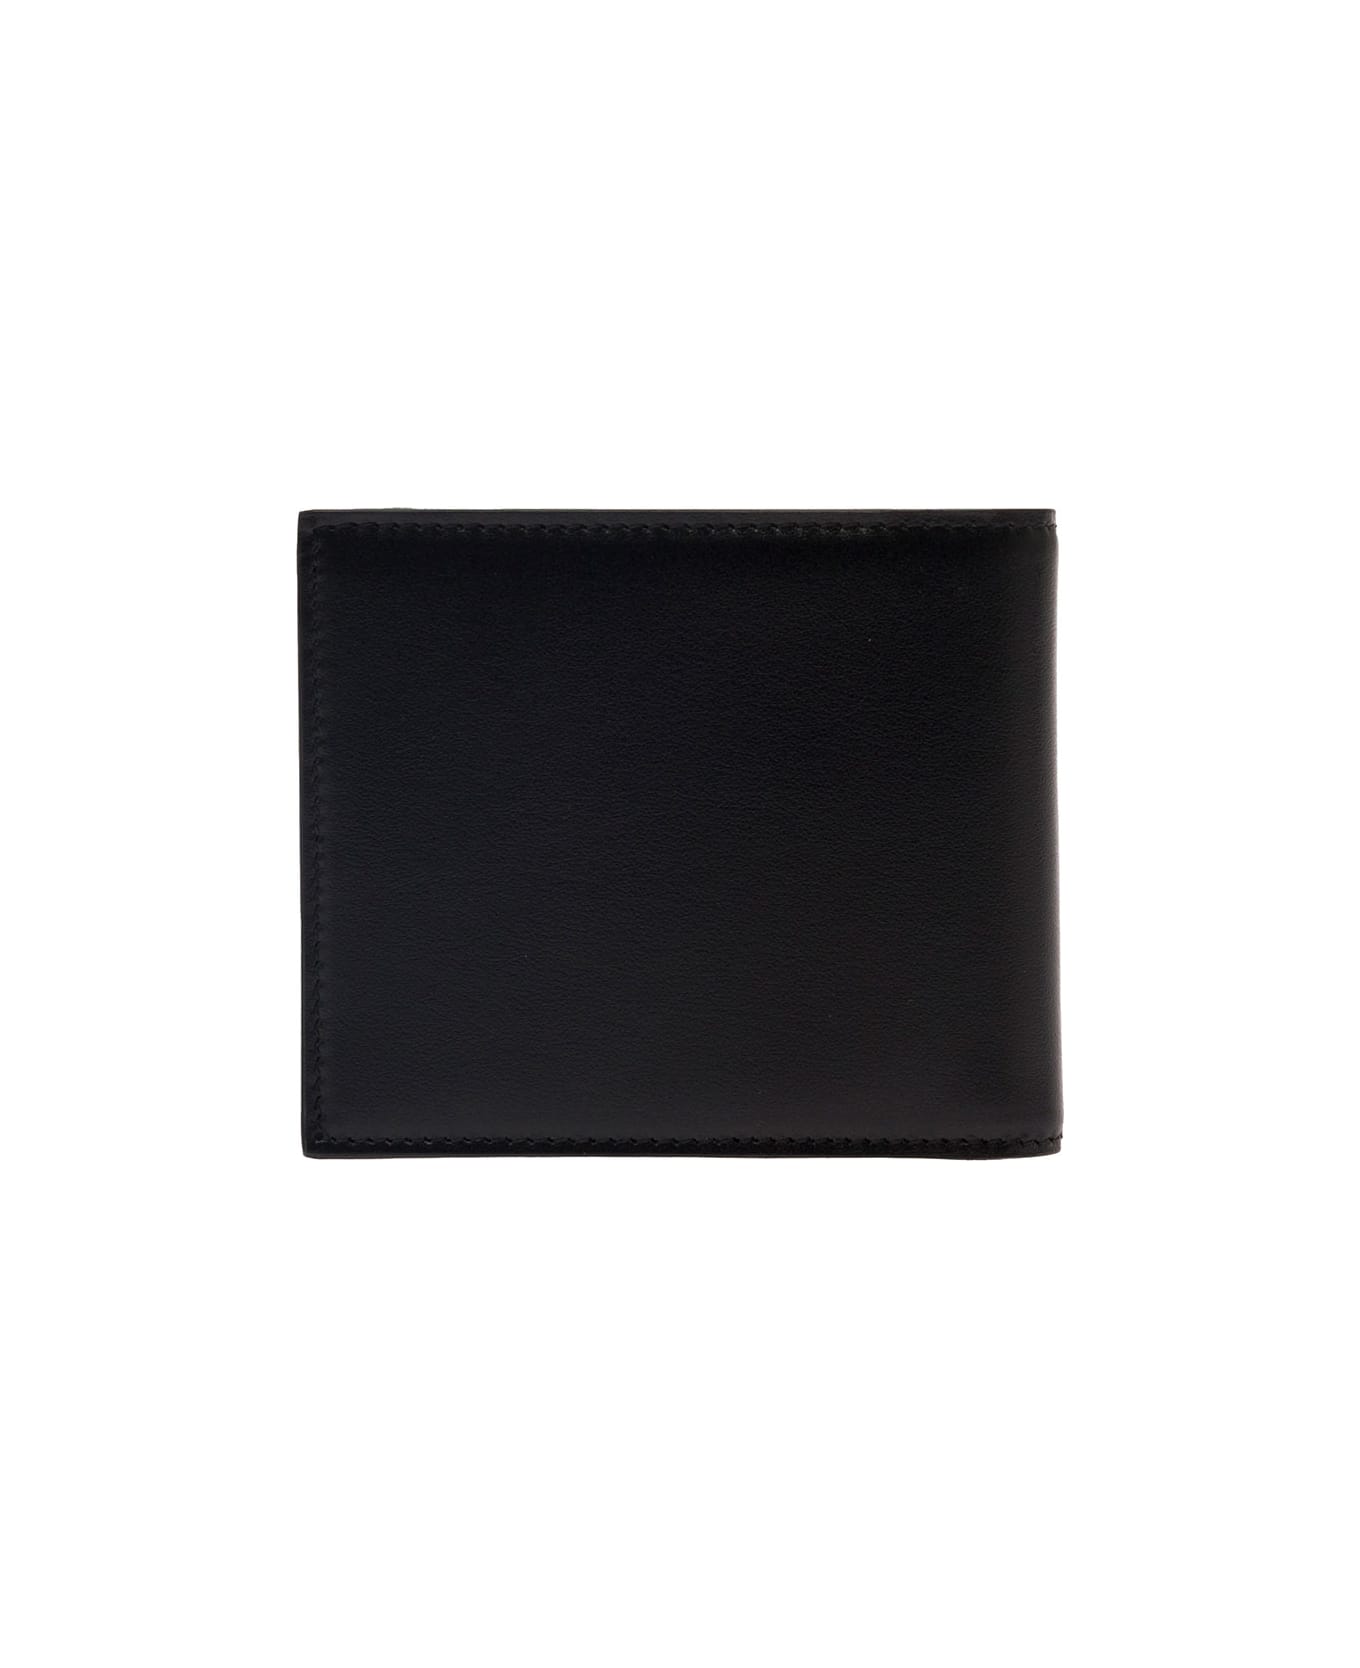 Dolce & Gabbana Black Wallet With Contrsting Print In Smooth Leather Man - Black 財布